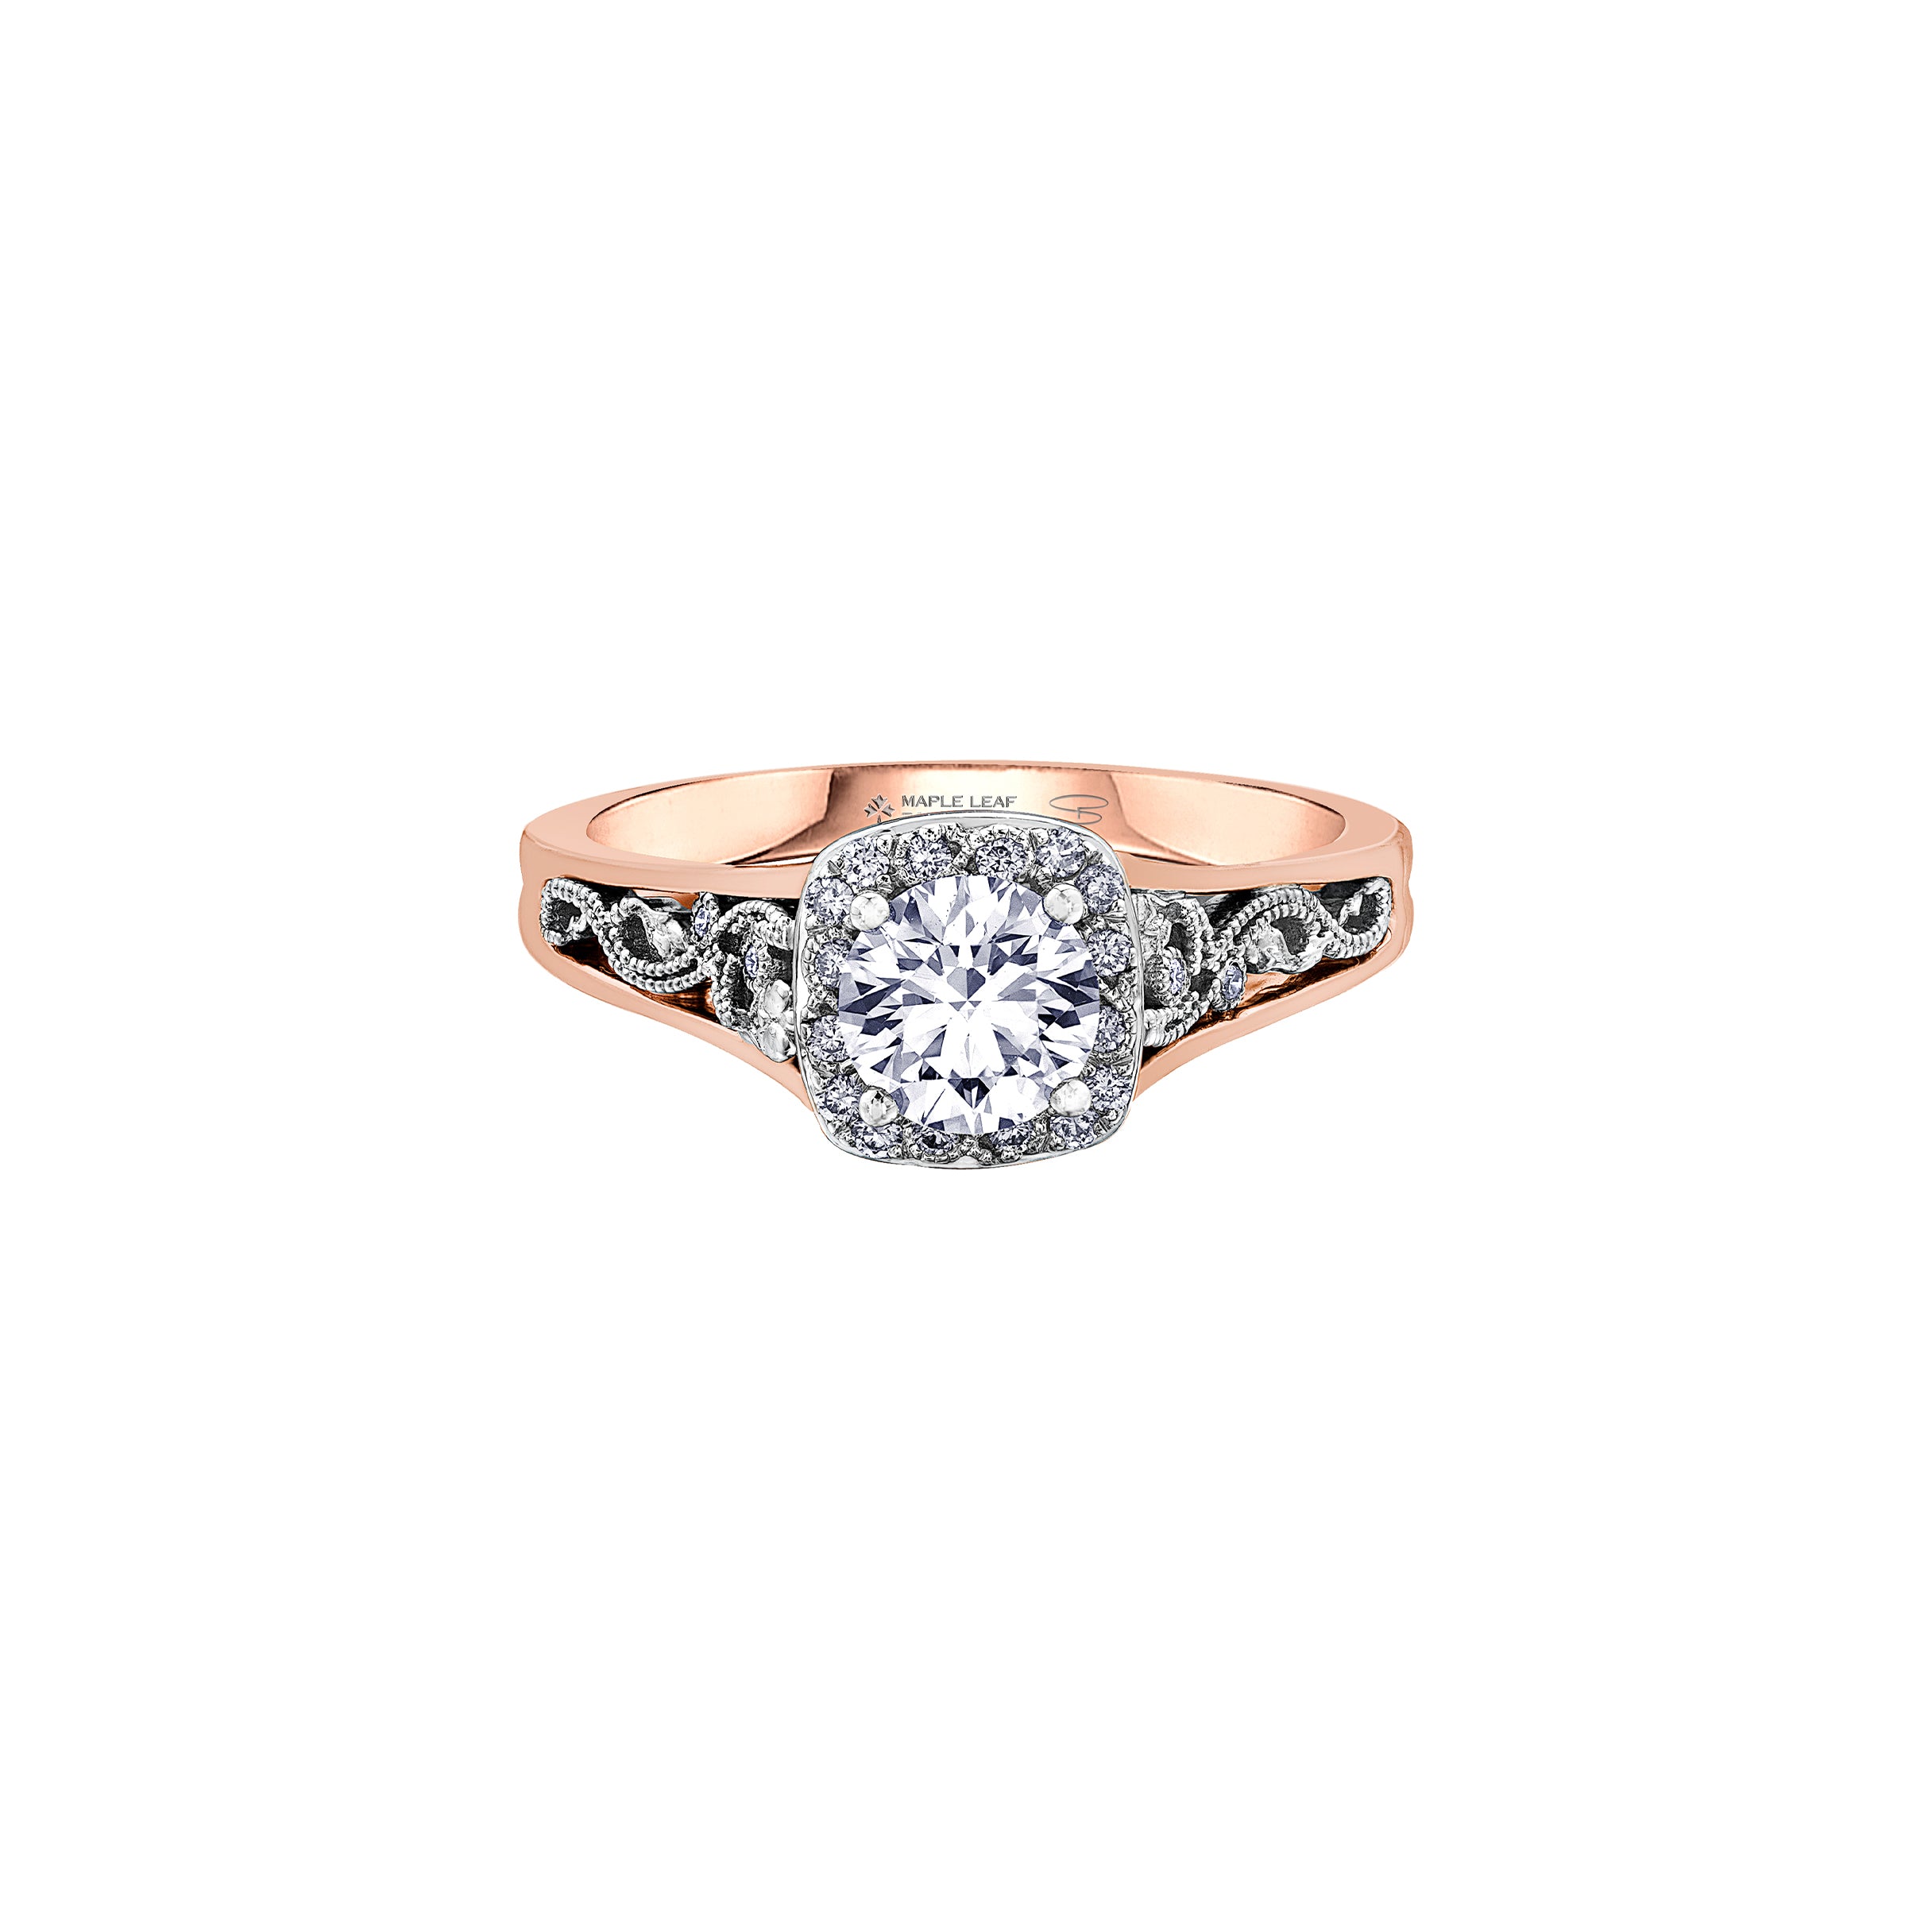 Crafted in 18KT white and rose Certified Canadian Gold, this engagement ring features a diamond halo with a round brilliant-cut Canadian centre diamond on a diamond set band with a rose vine design.